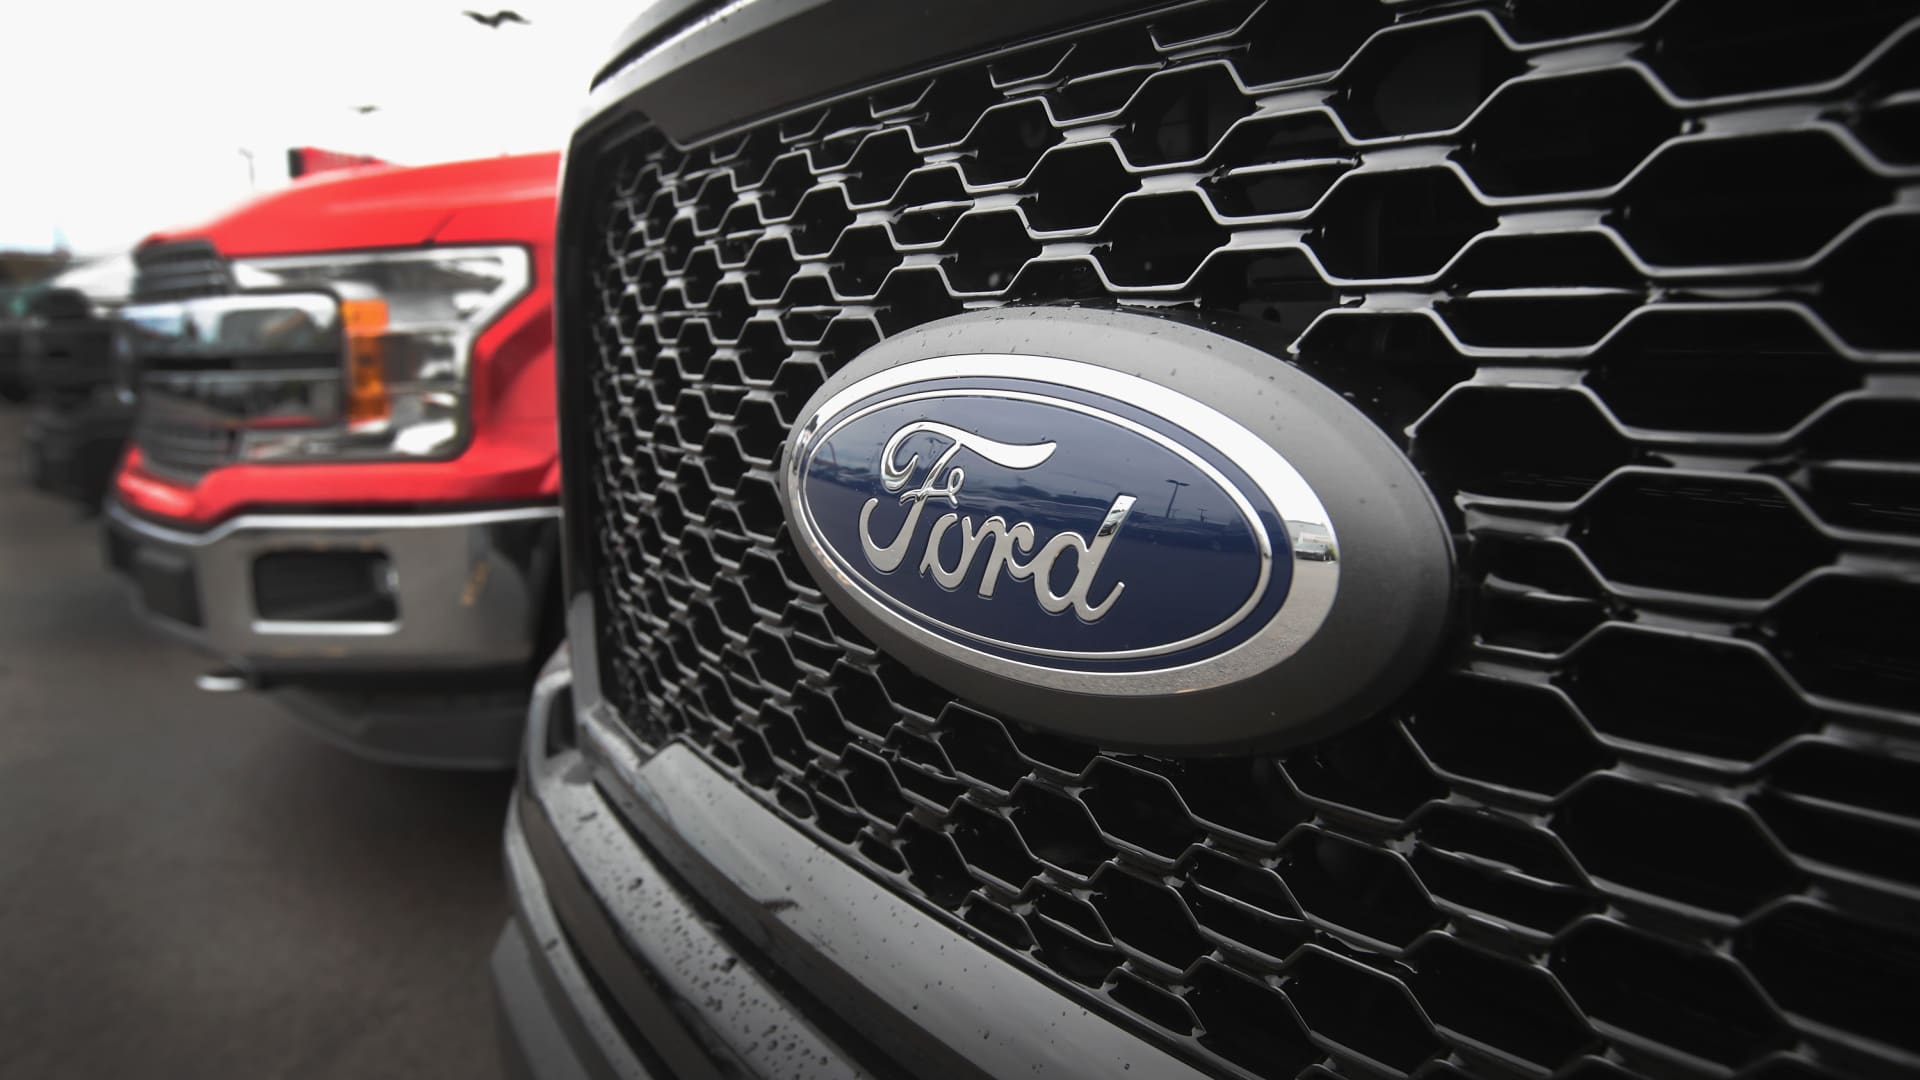 Ford's supply chain problems include blue oval badges for F-Series pickups